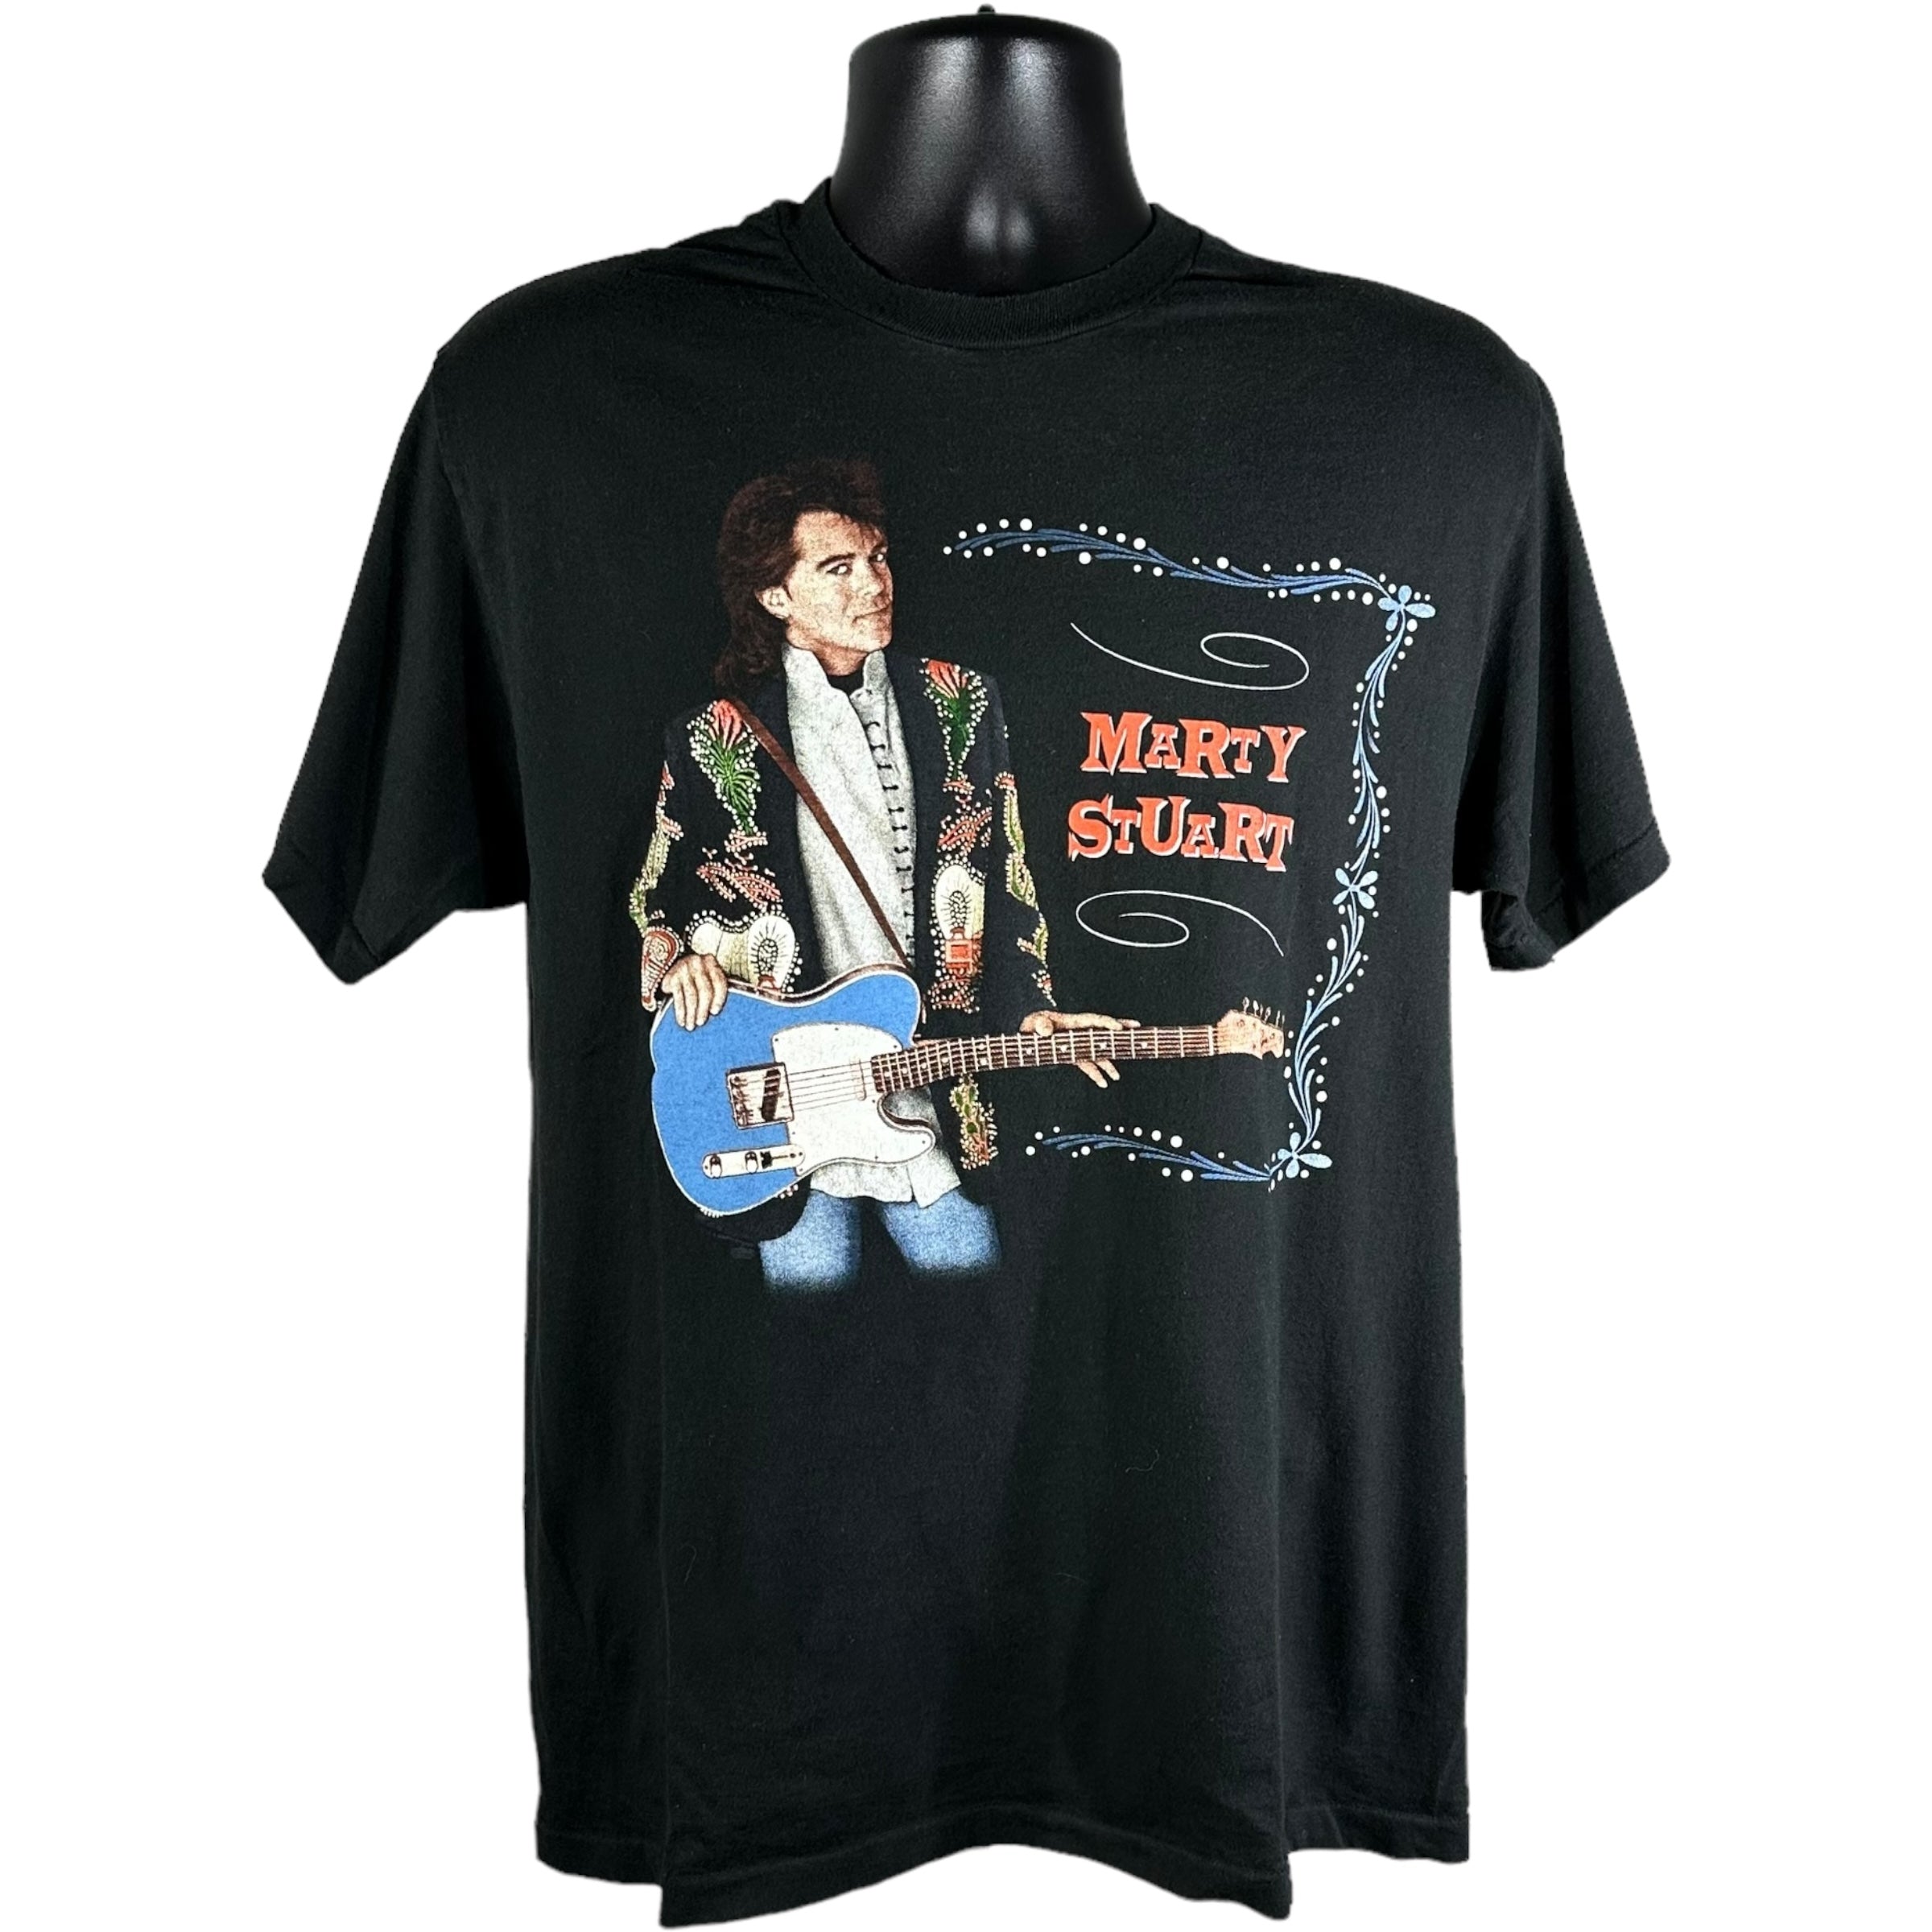 Marty Stuart "The Marty Party" Tee